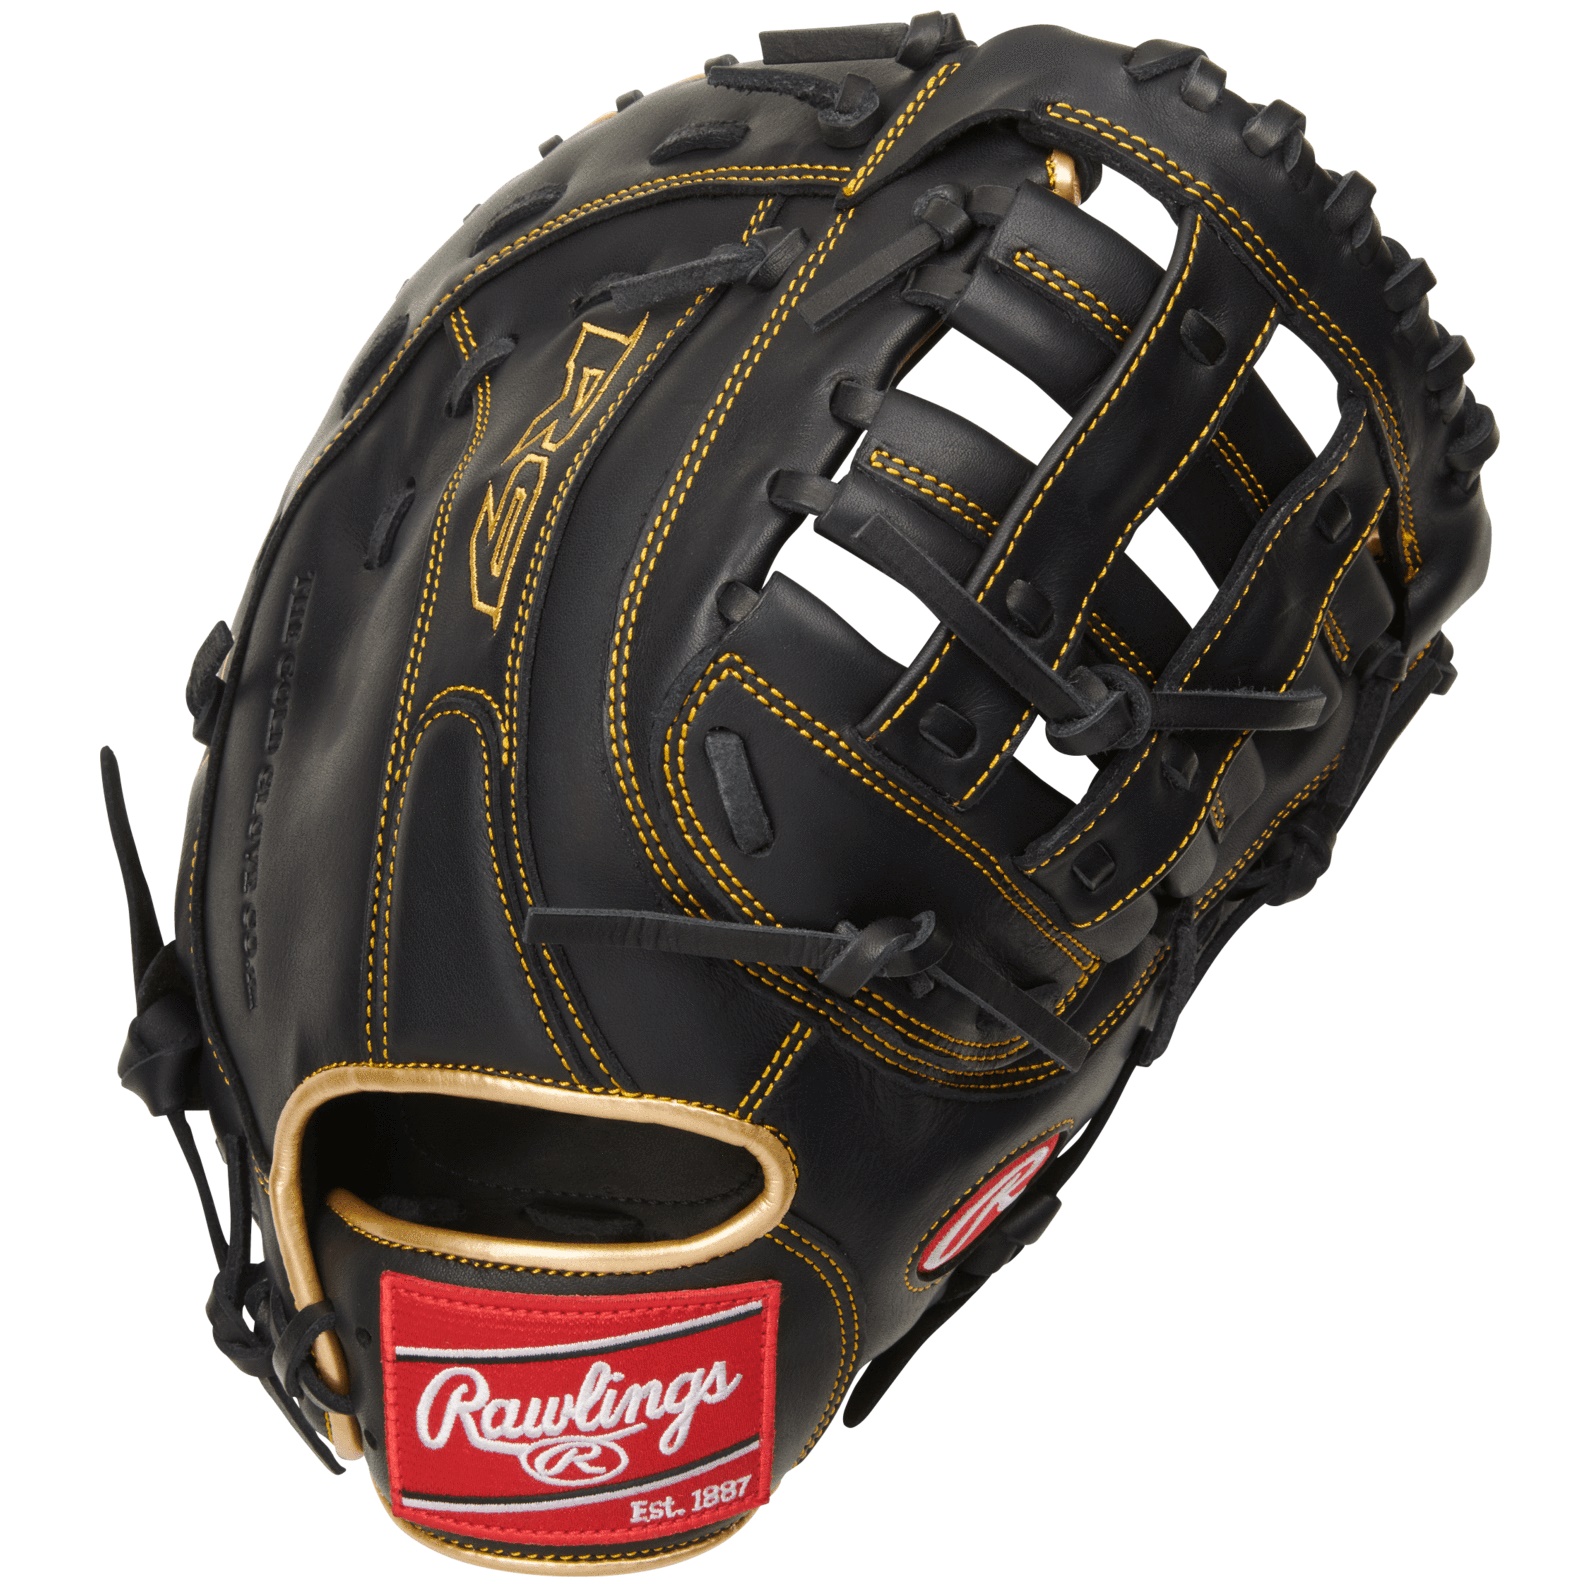 rawlings-r9-series-baseball-first-base-mitt-mod-pro-h-web-12-5-inch-right-hand-throw R9FM18BG-RightHandThrow Rawlings  <p>The 2021 R9 series 12.5-inch first base mitt was crafted with